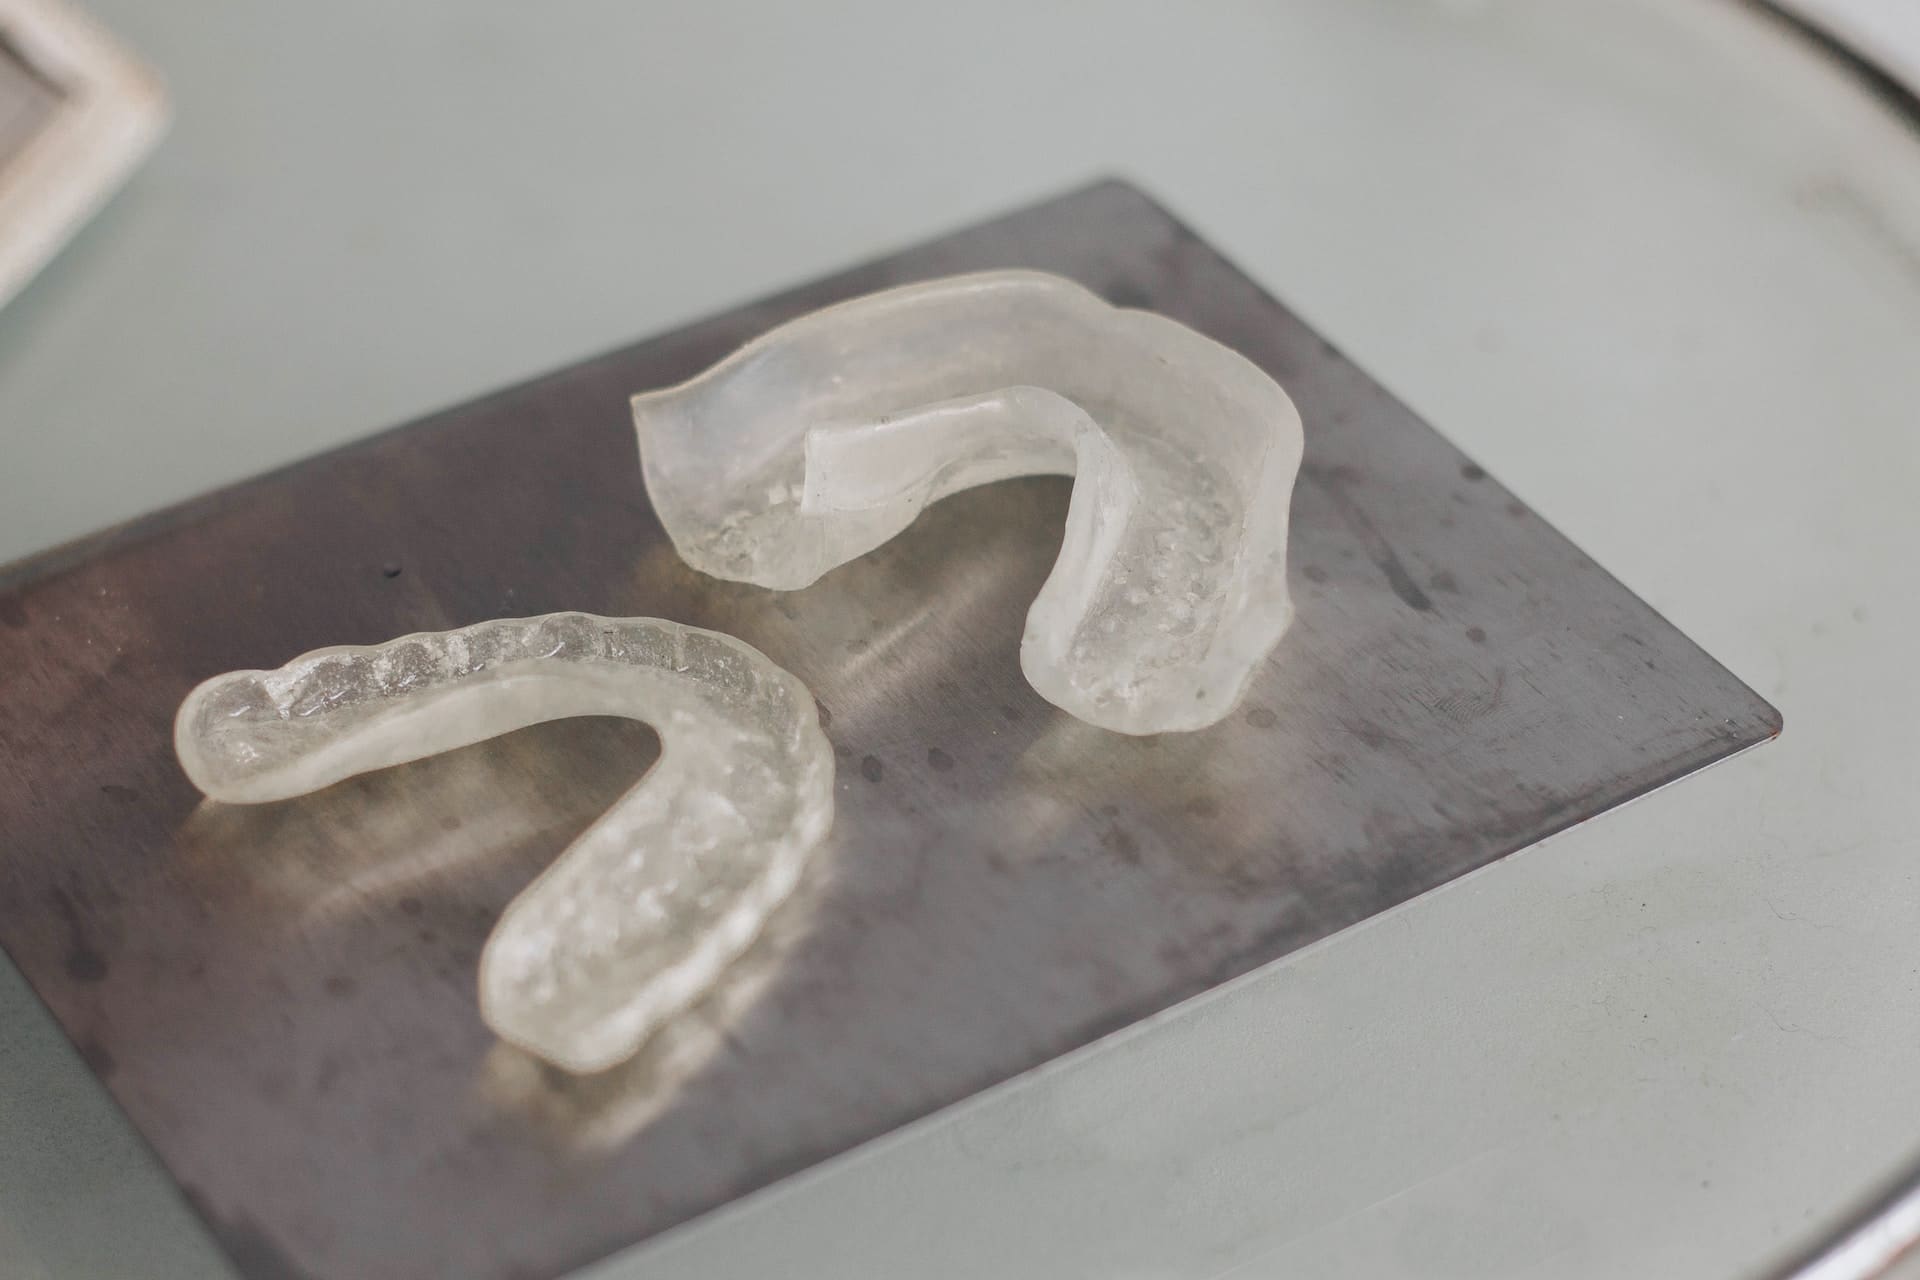 Close-up of clear Invisalign aligners being placed on a person's teeth.